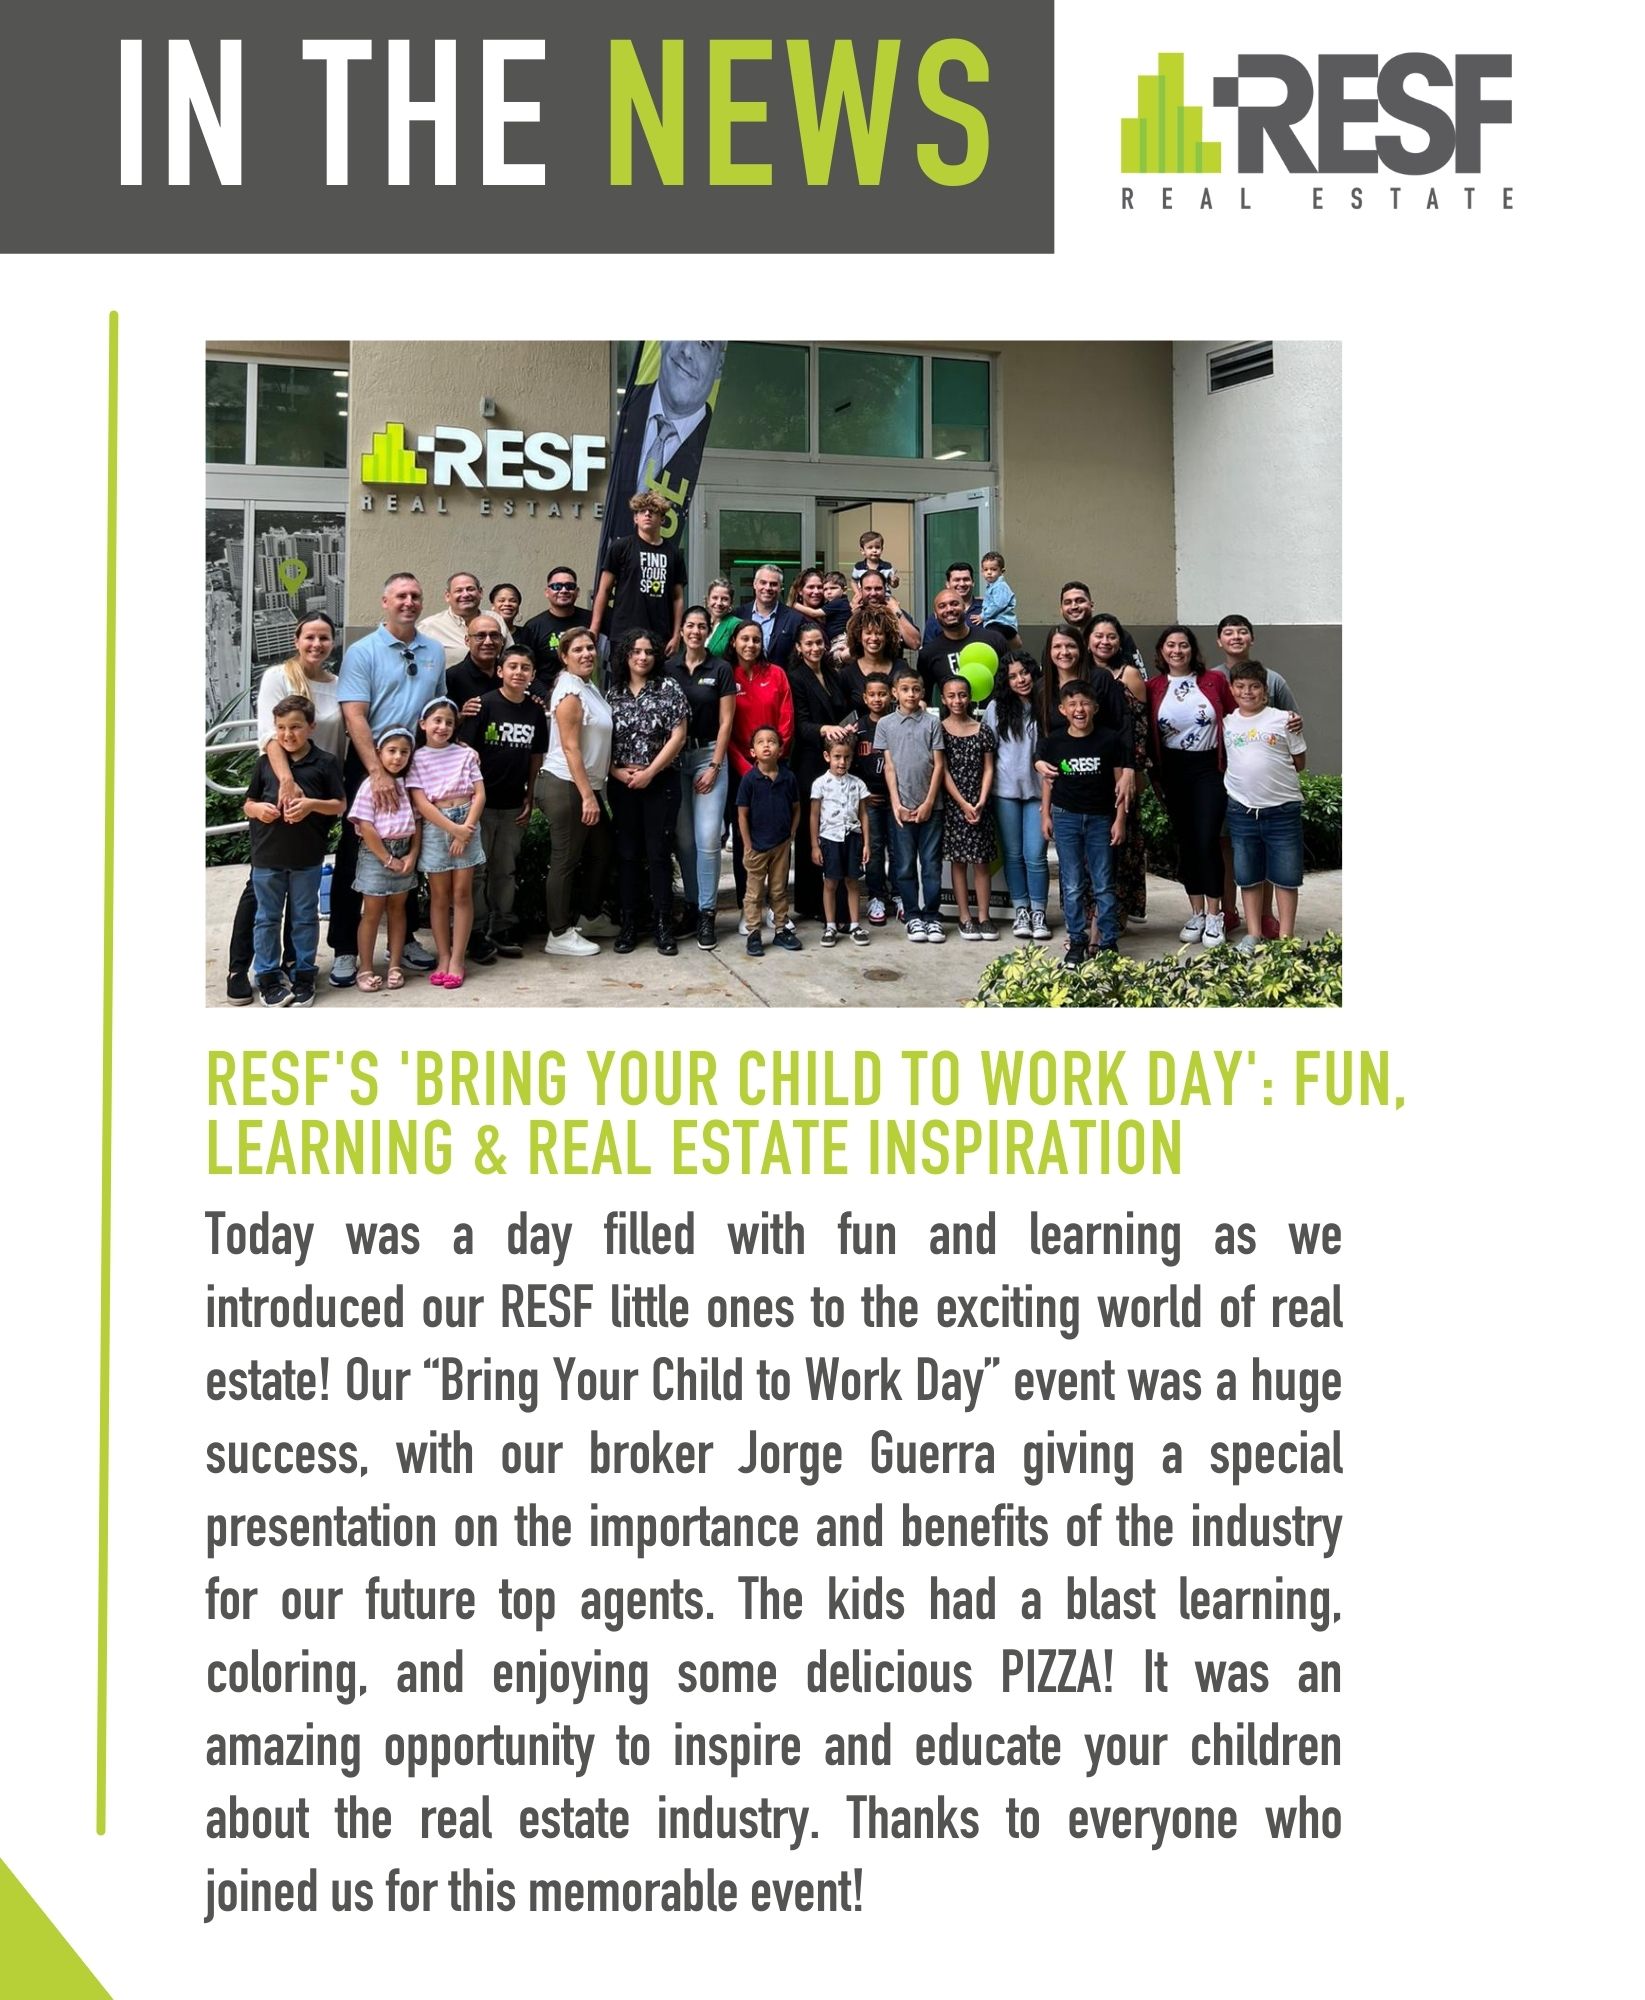 RESF’s ‘Bring Your Child to Work Day’: Fun, Learning & Real Estate Inspiration.